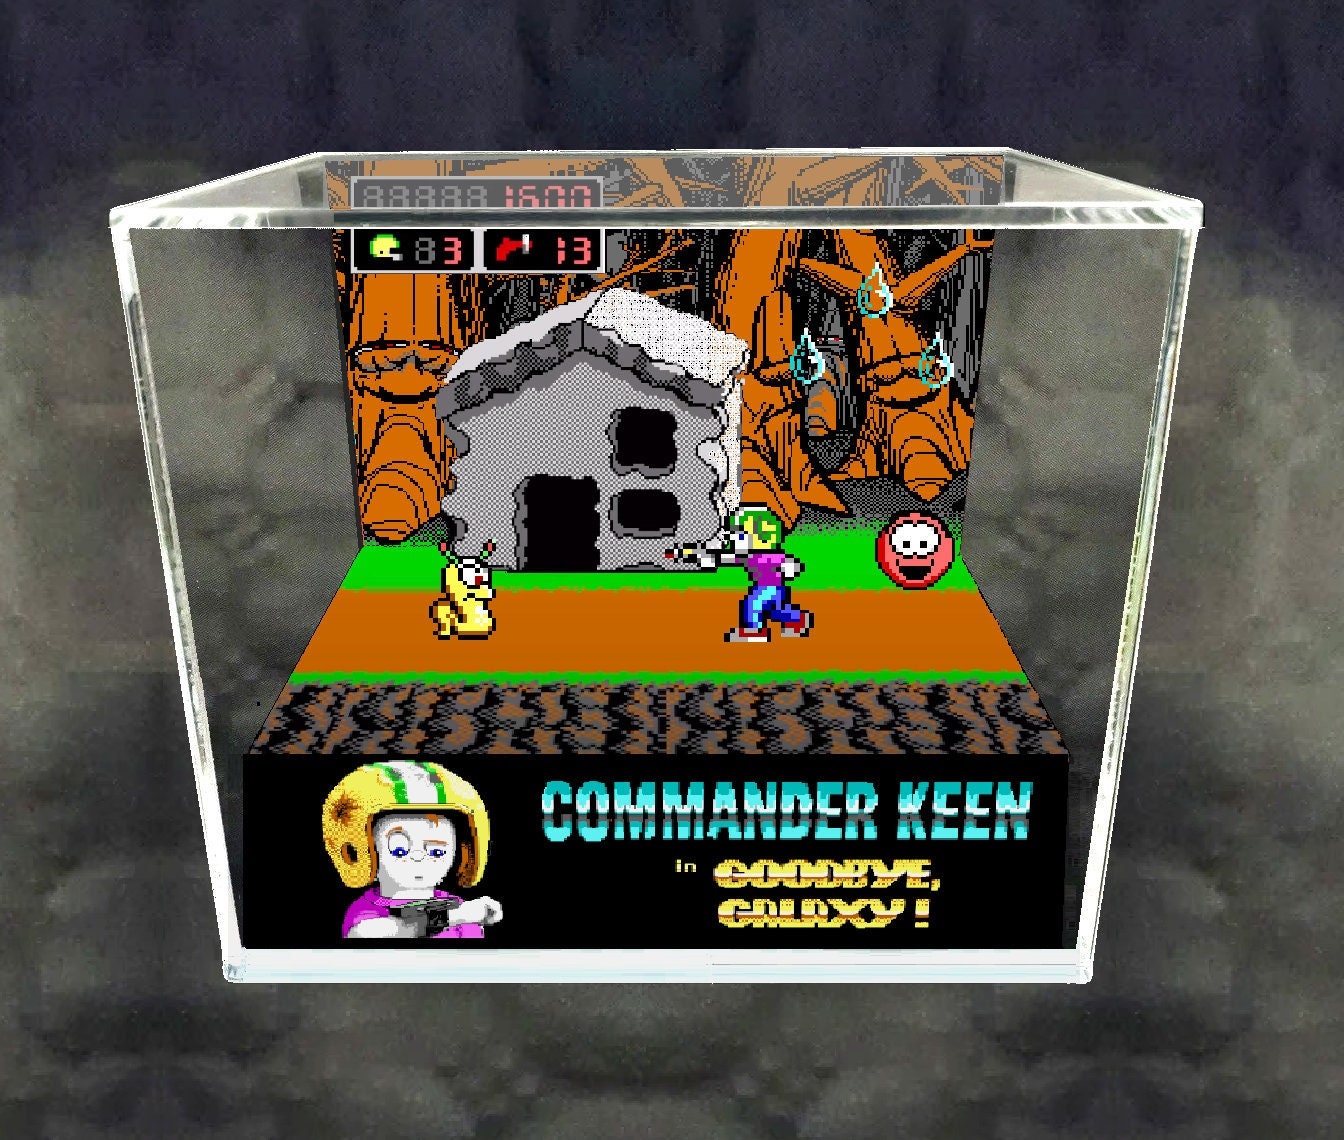 Cube Commander 🕹️ Play on CrazyGames